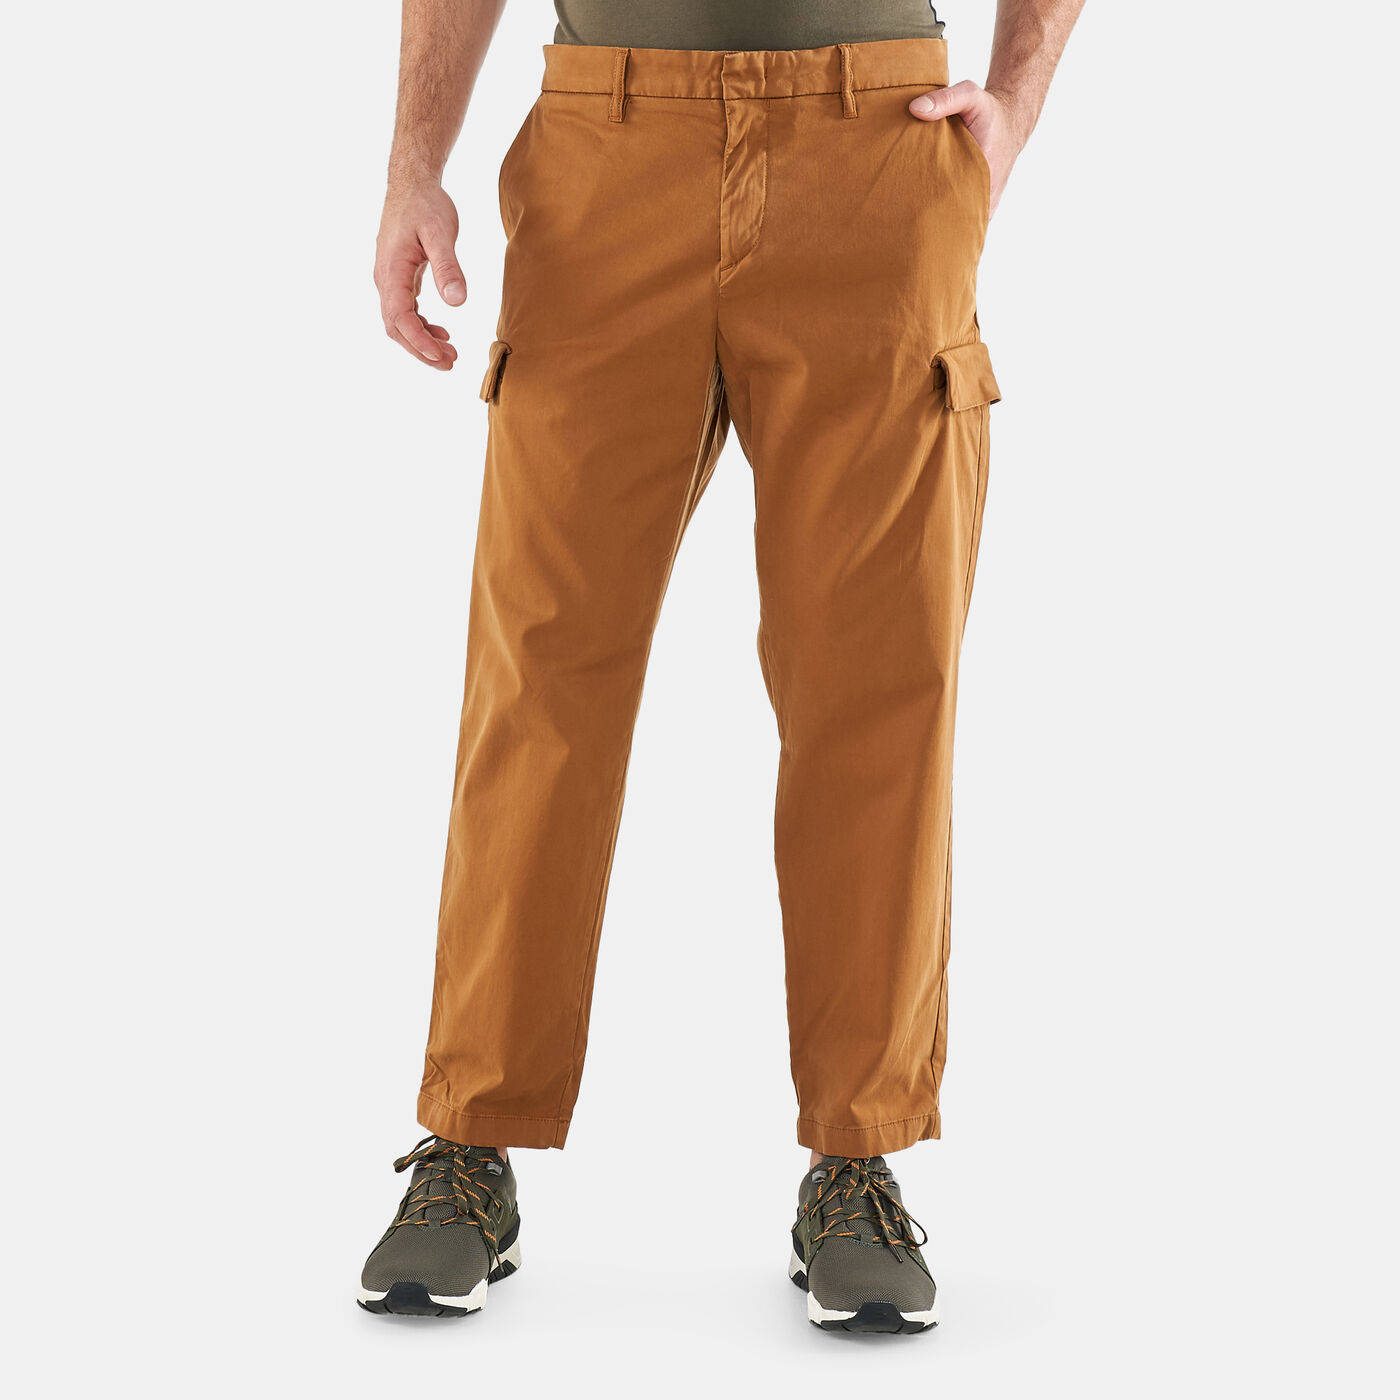 Men's Contemporary Cargo Ankle Length Slim Tapered Pants